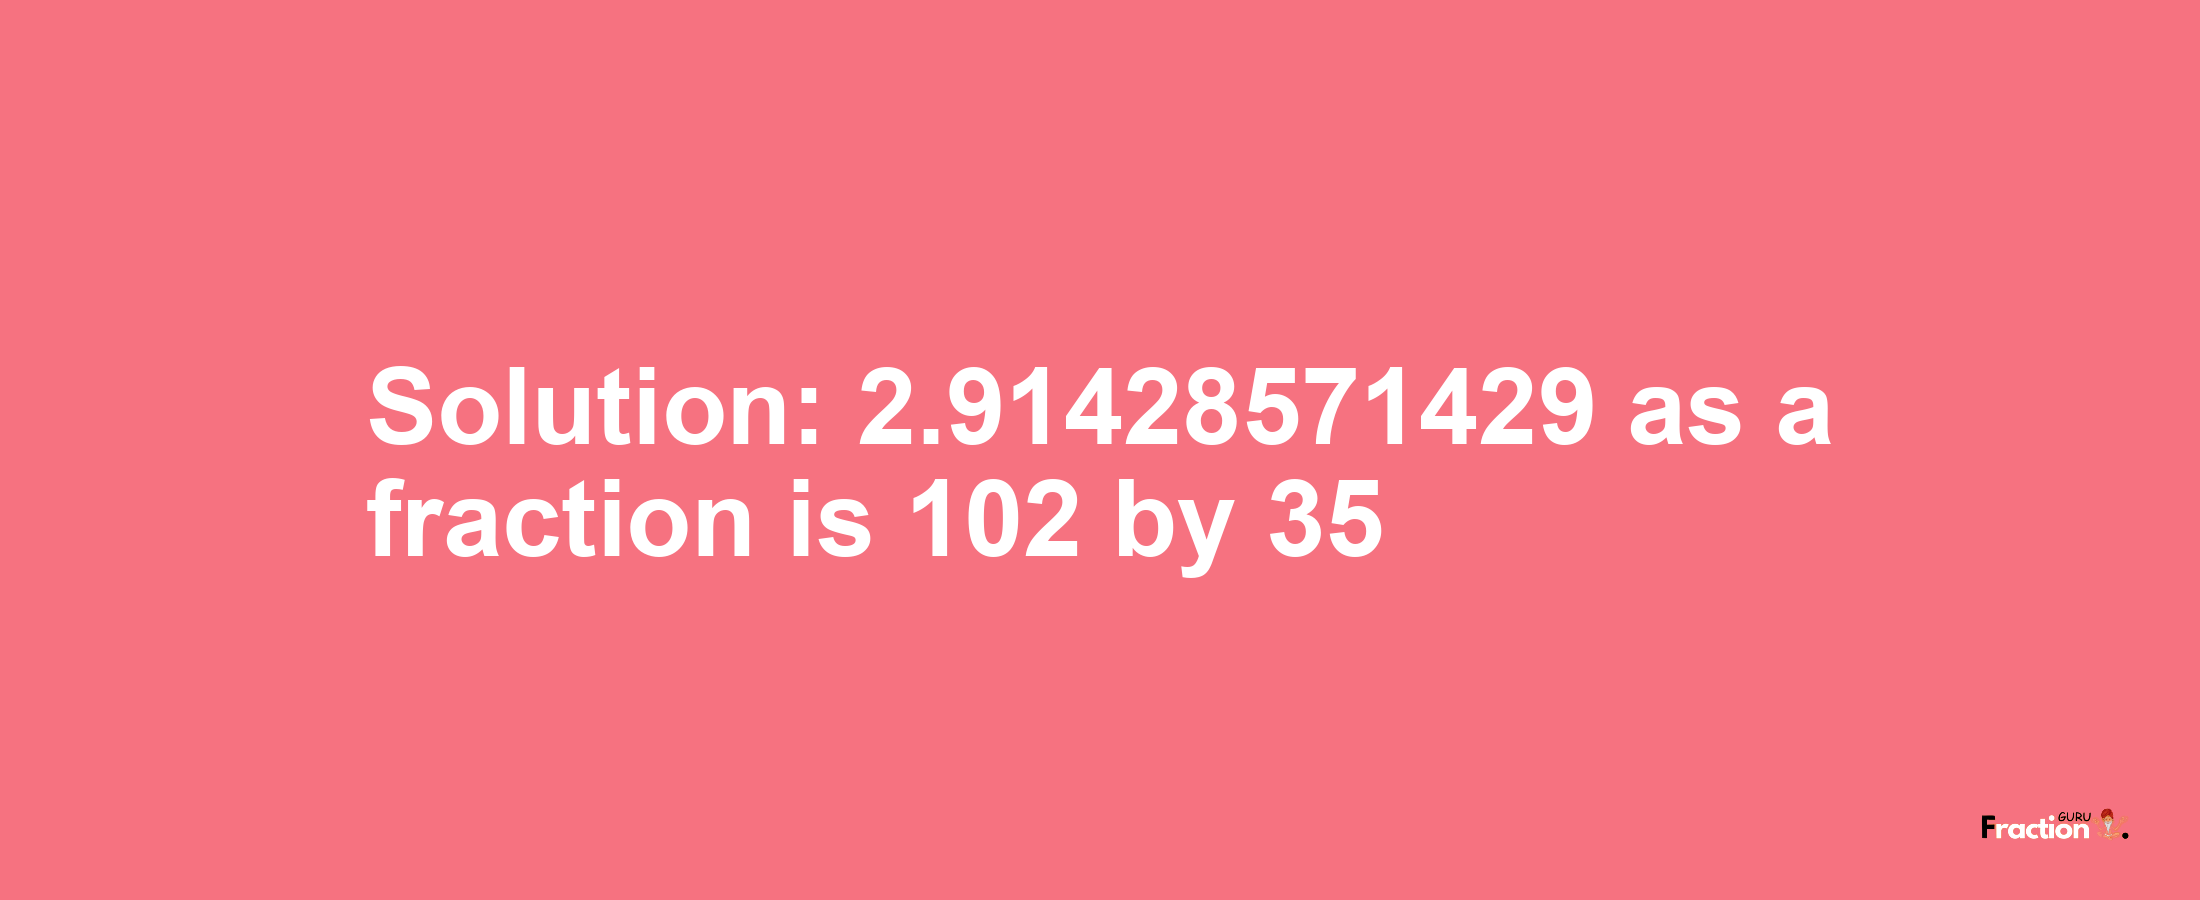 Solution:2.91428571429 as a fraction is 102/35